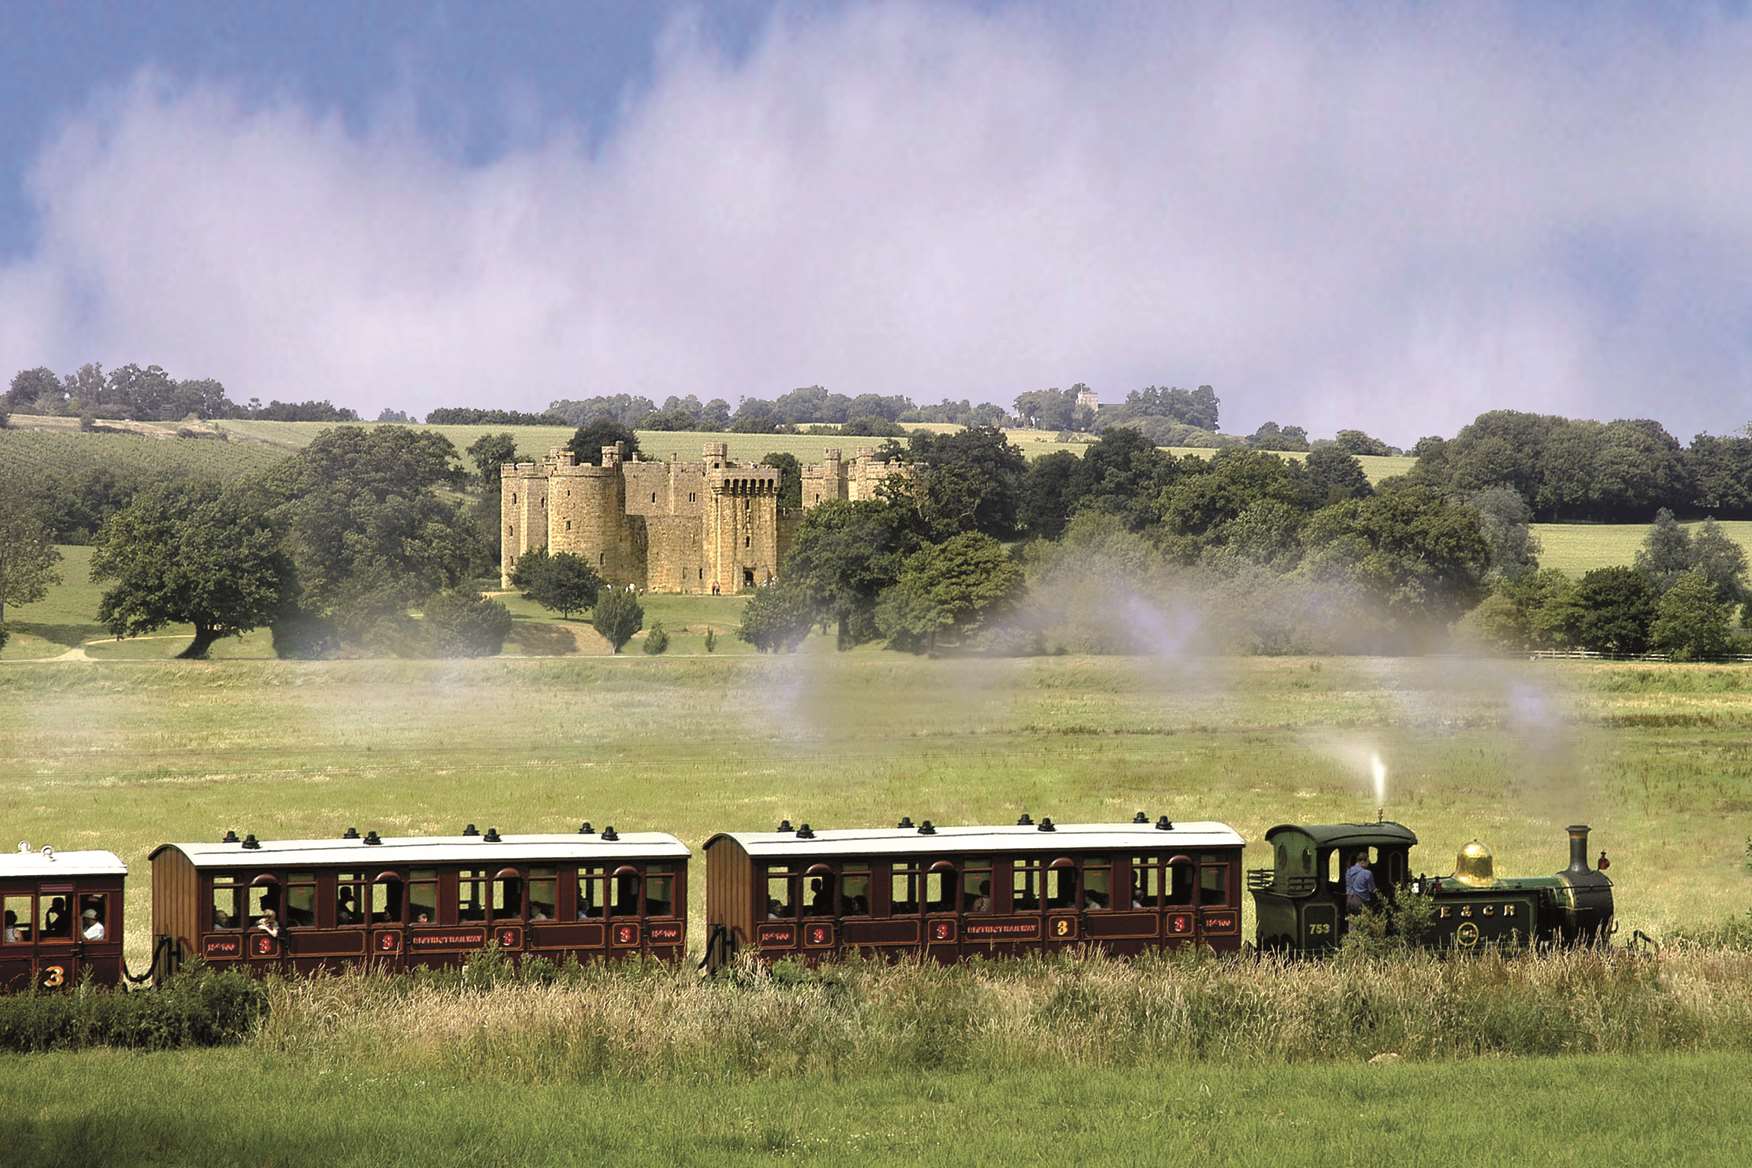 The Kent and East Sussex Railway heading towards Bodiam Castle